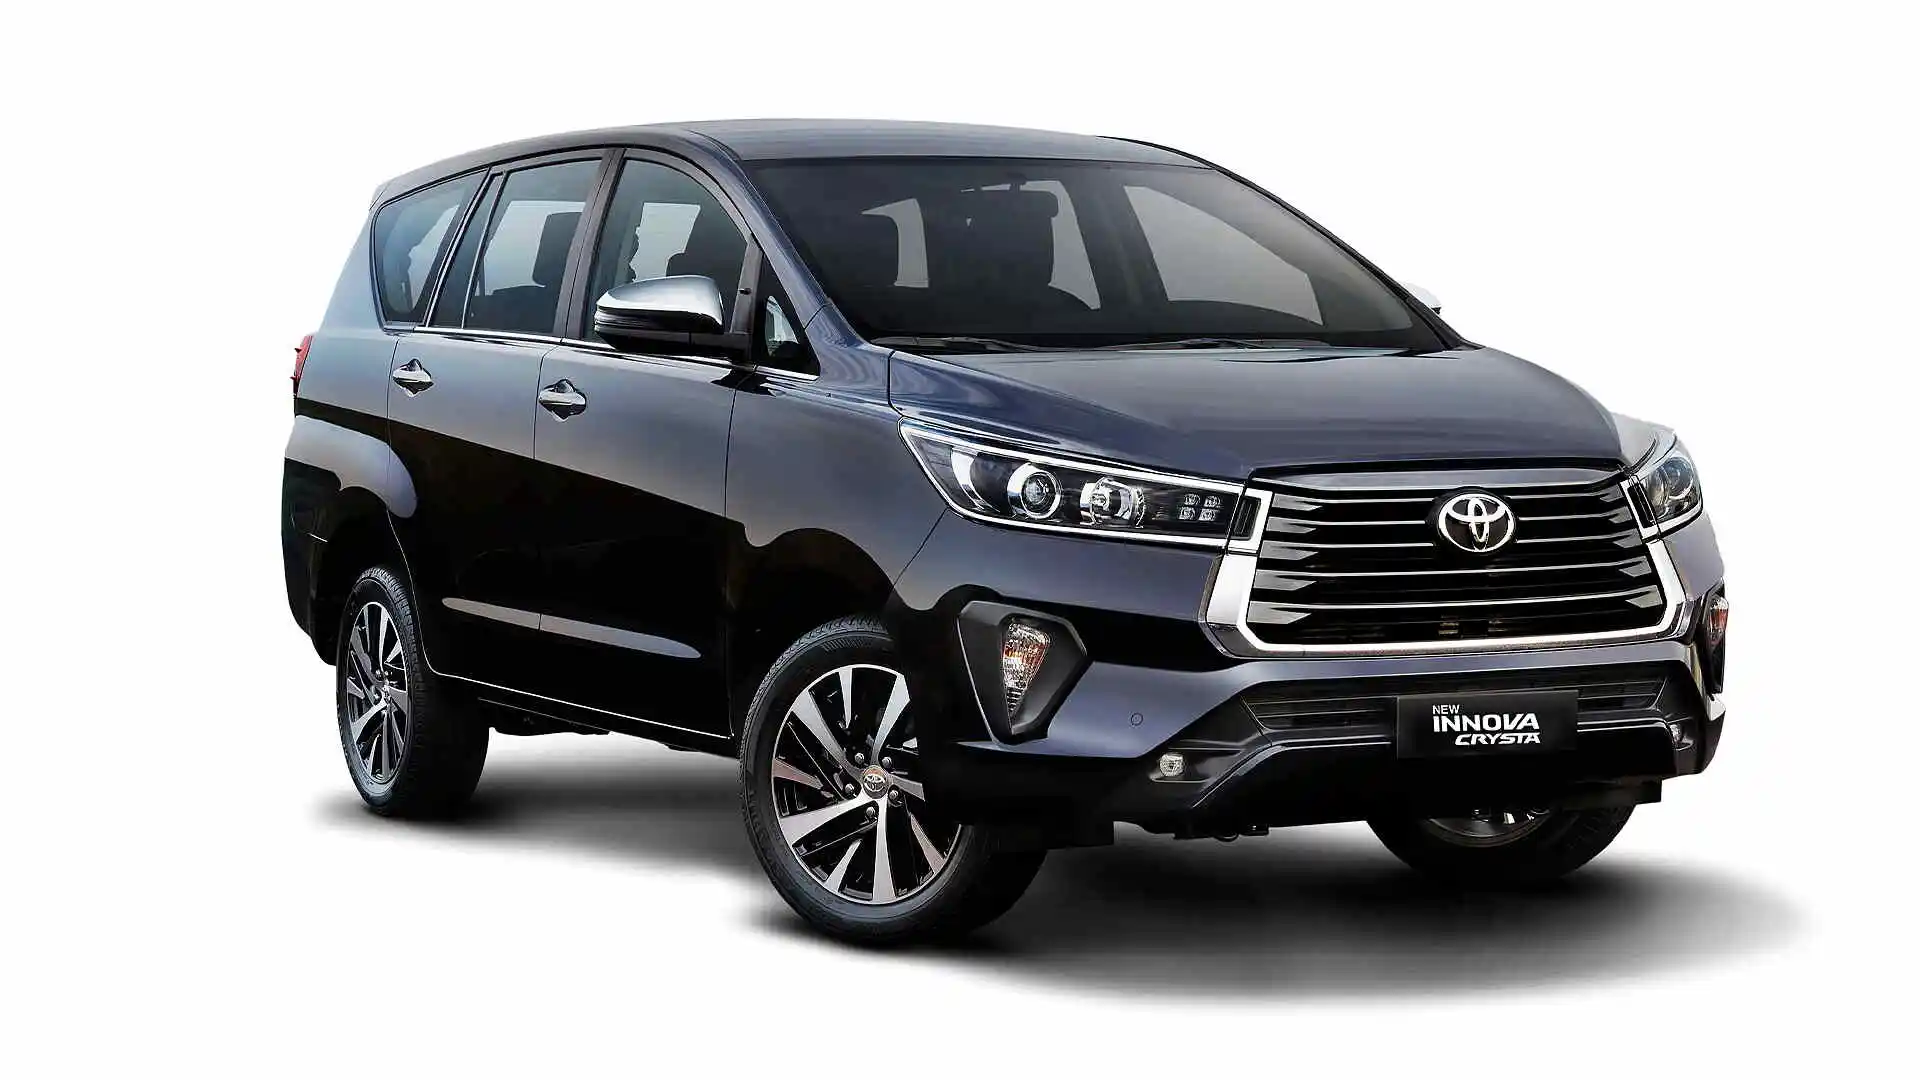 Book innova crysta for outstation and local sight seeing in just 17 rs per km